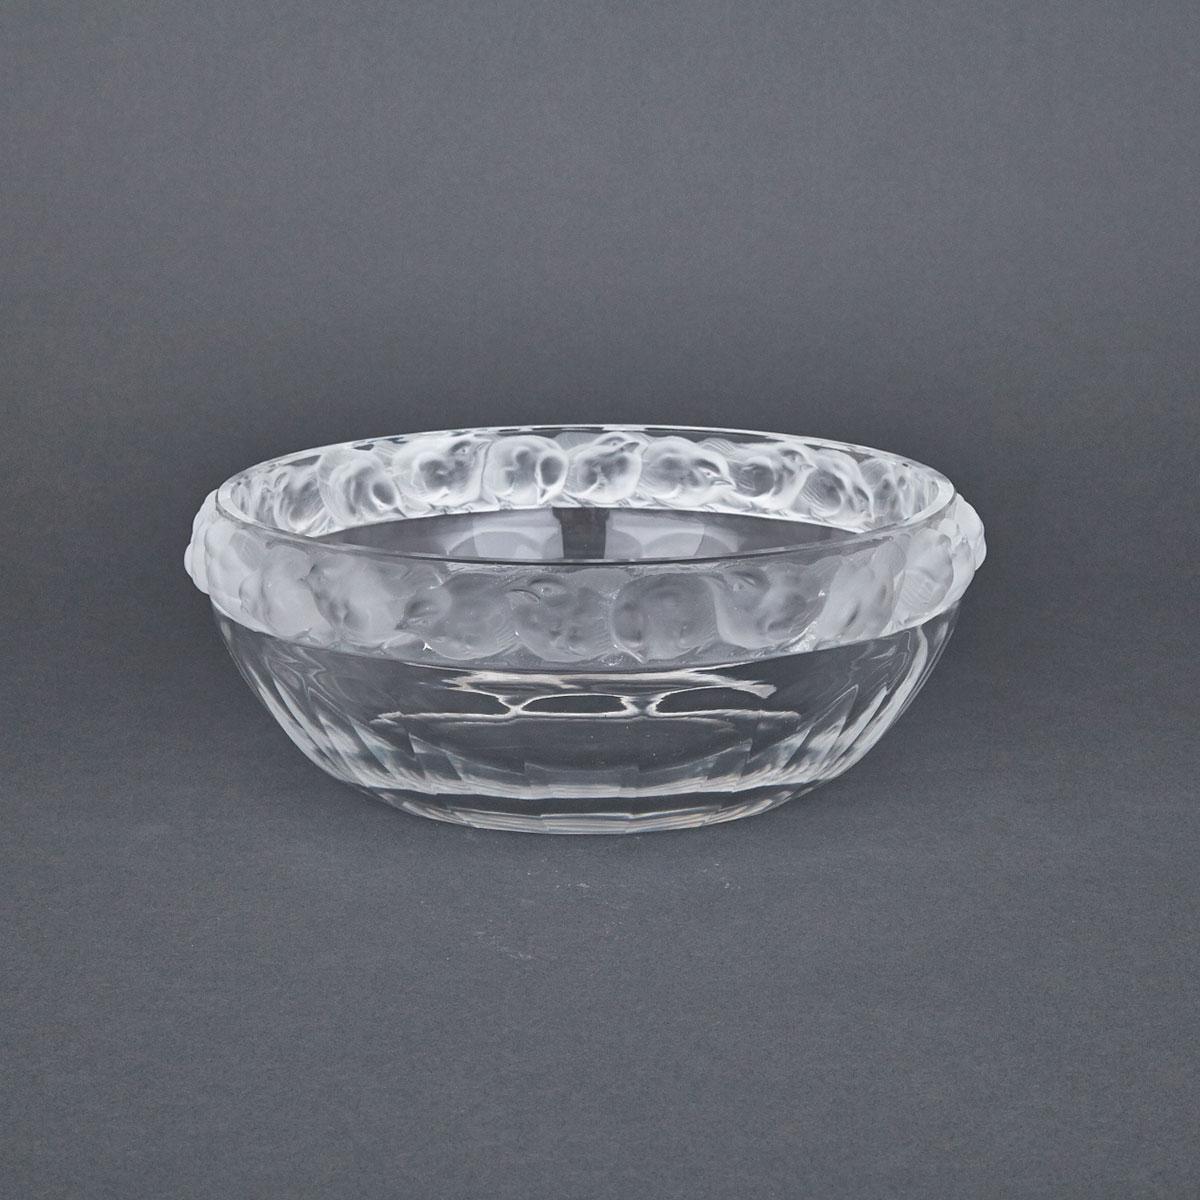 ‘Mésanges’, Lalique Moulded and Frosted Glass Bowl, post-1945